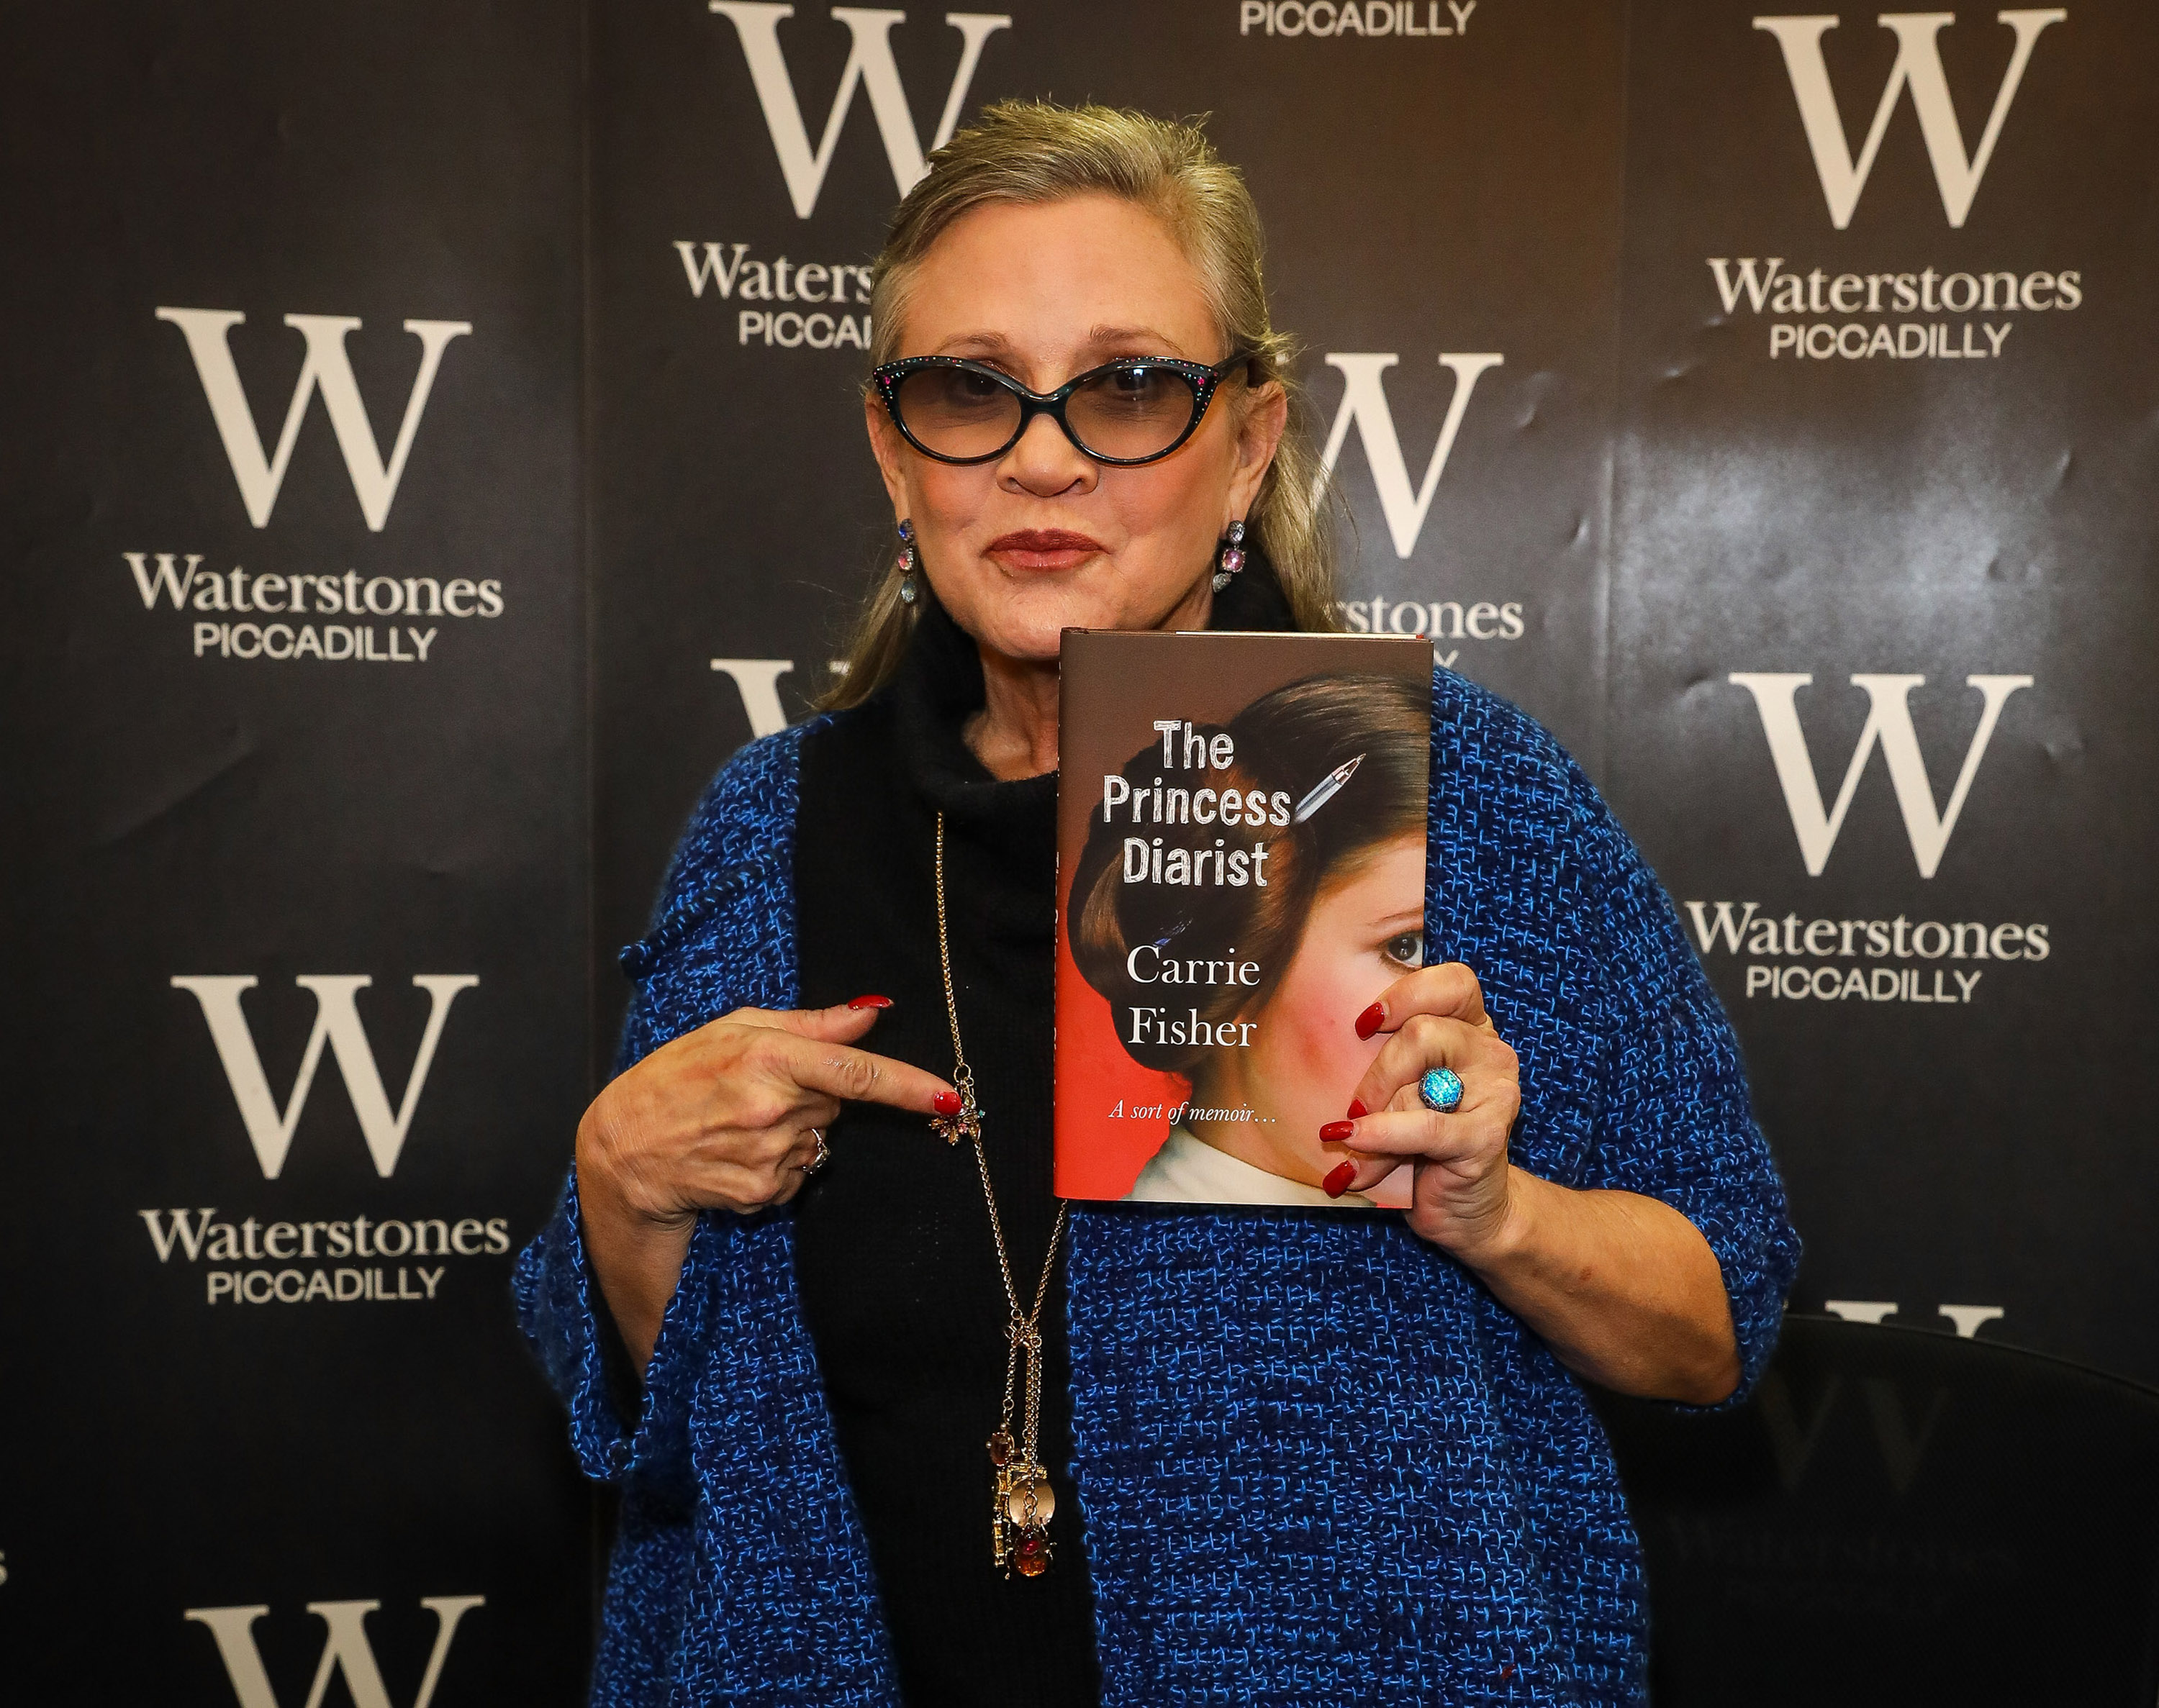 LONDON, ENGLAND - DECEMBER 11: Carrie Fisher signs copies of her new book "The Princess Diarist" at Waterstones, Piccadilly, on December 11, 2016 in London, England. (Photo by David M. Benett/Dave Benett/Getty Images)